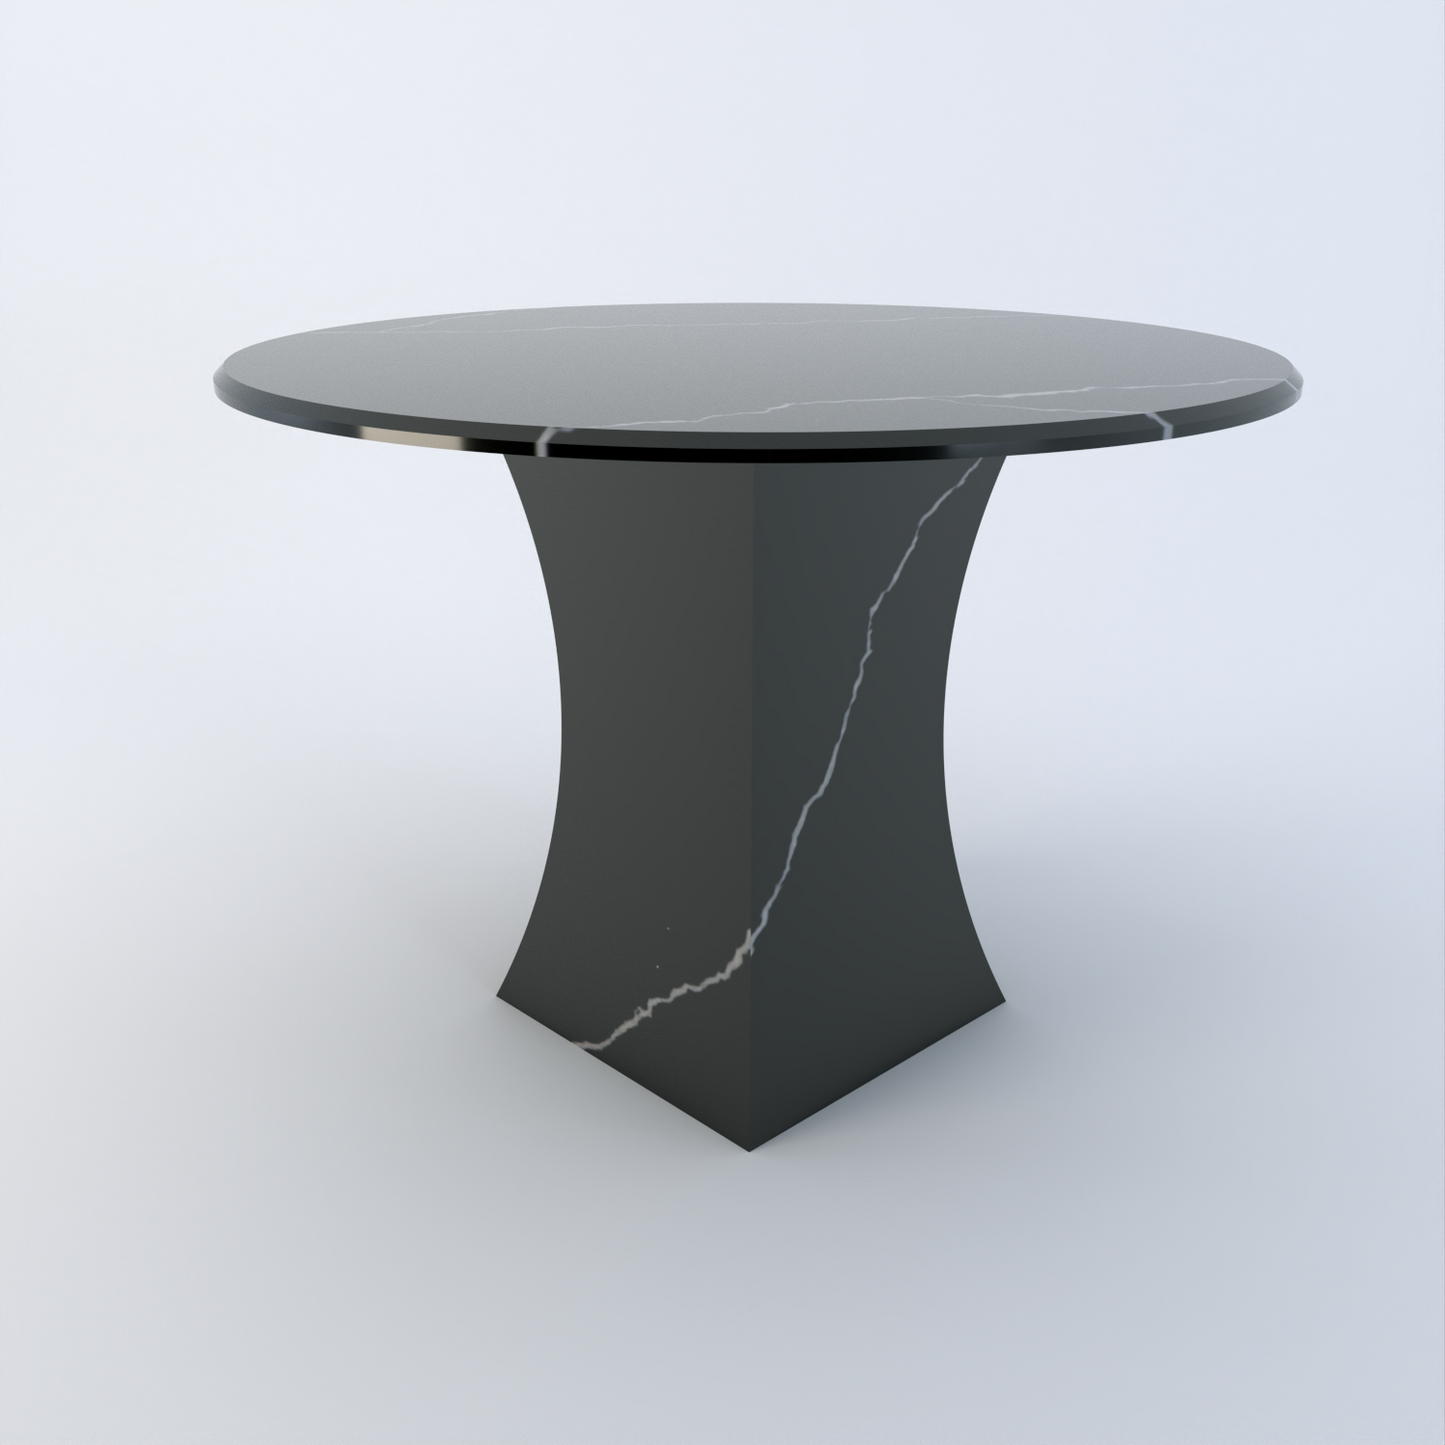 MONZA STONE DINING TABLE